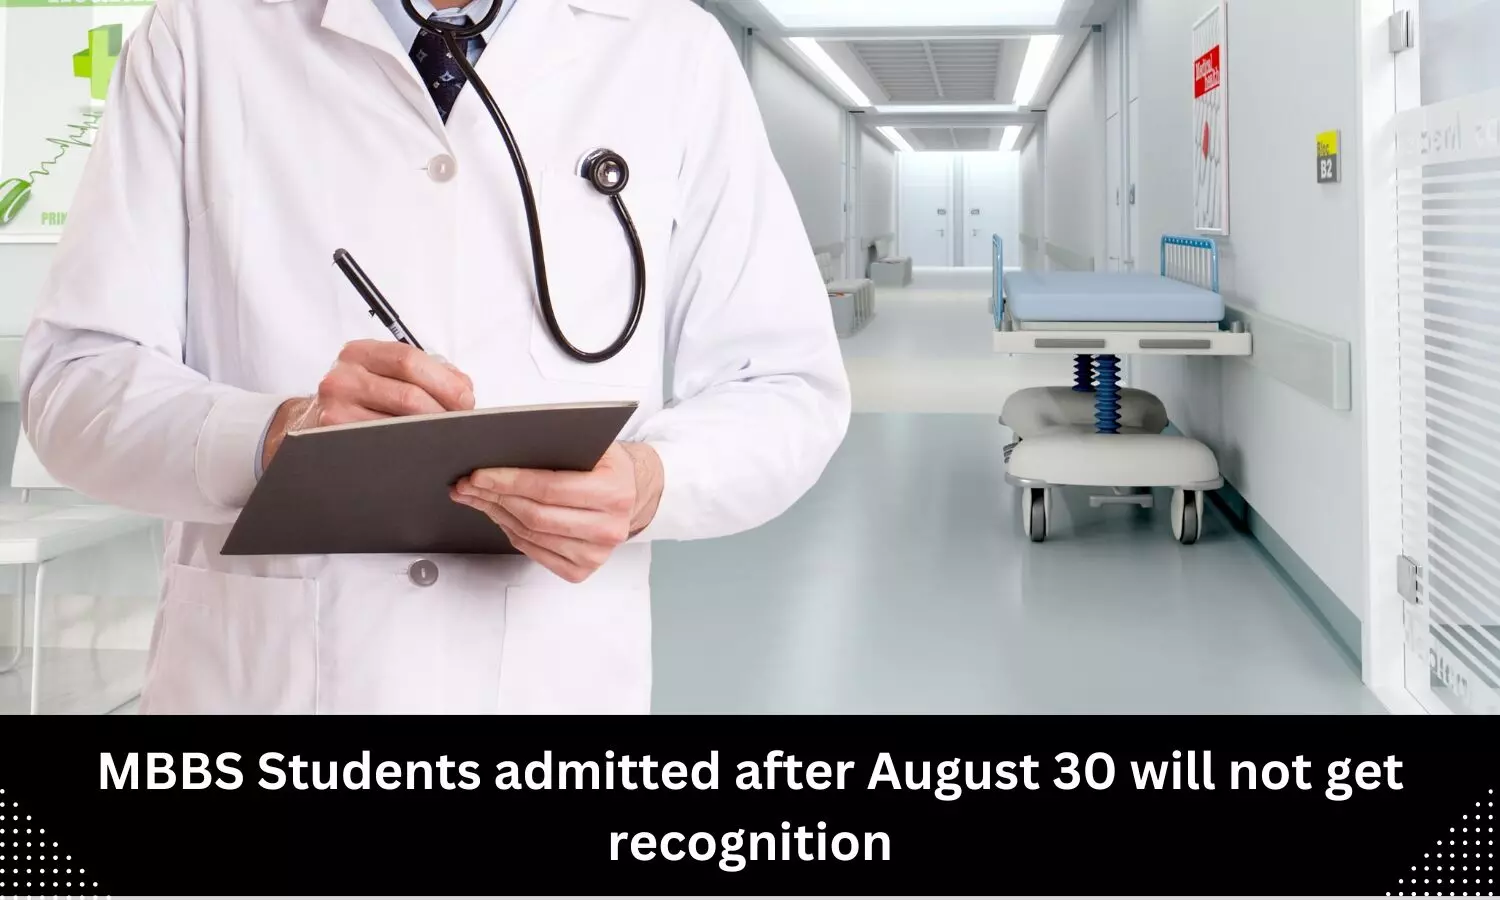 MBBS students admitted after August 30 will not get recognition: NMC